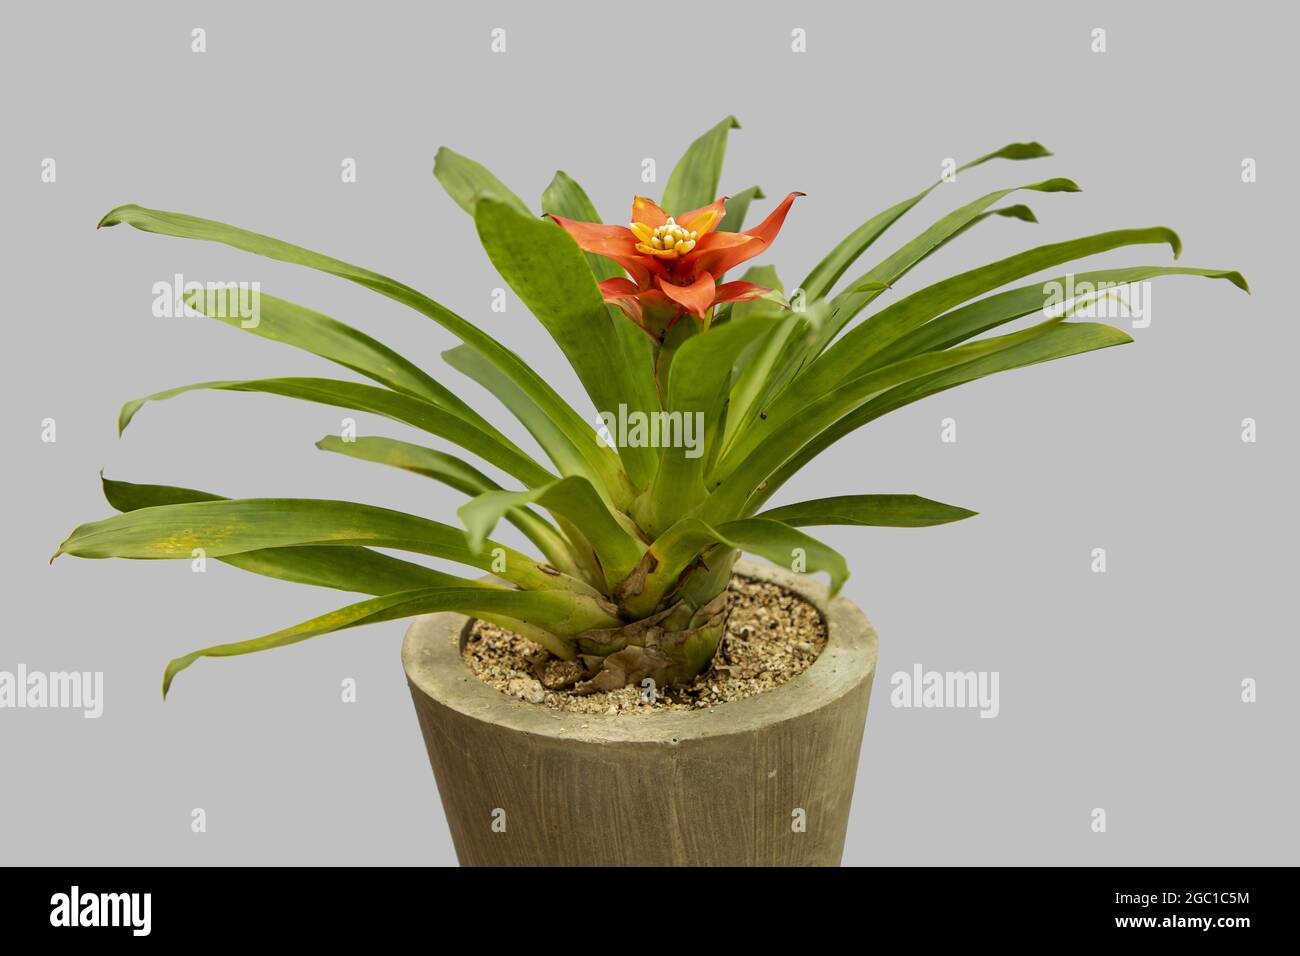 Guzmania plant in a clay pot on a gray background Stock Photo